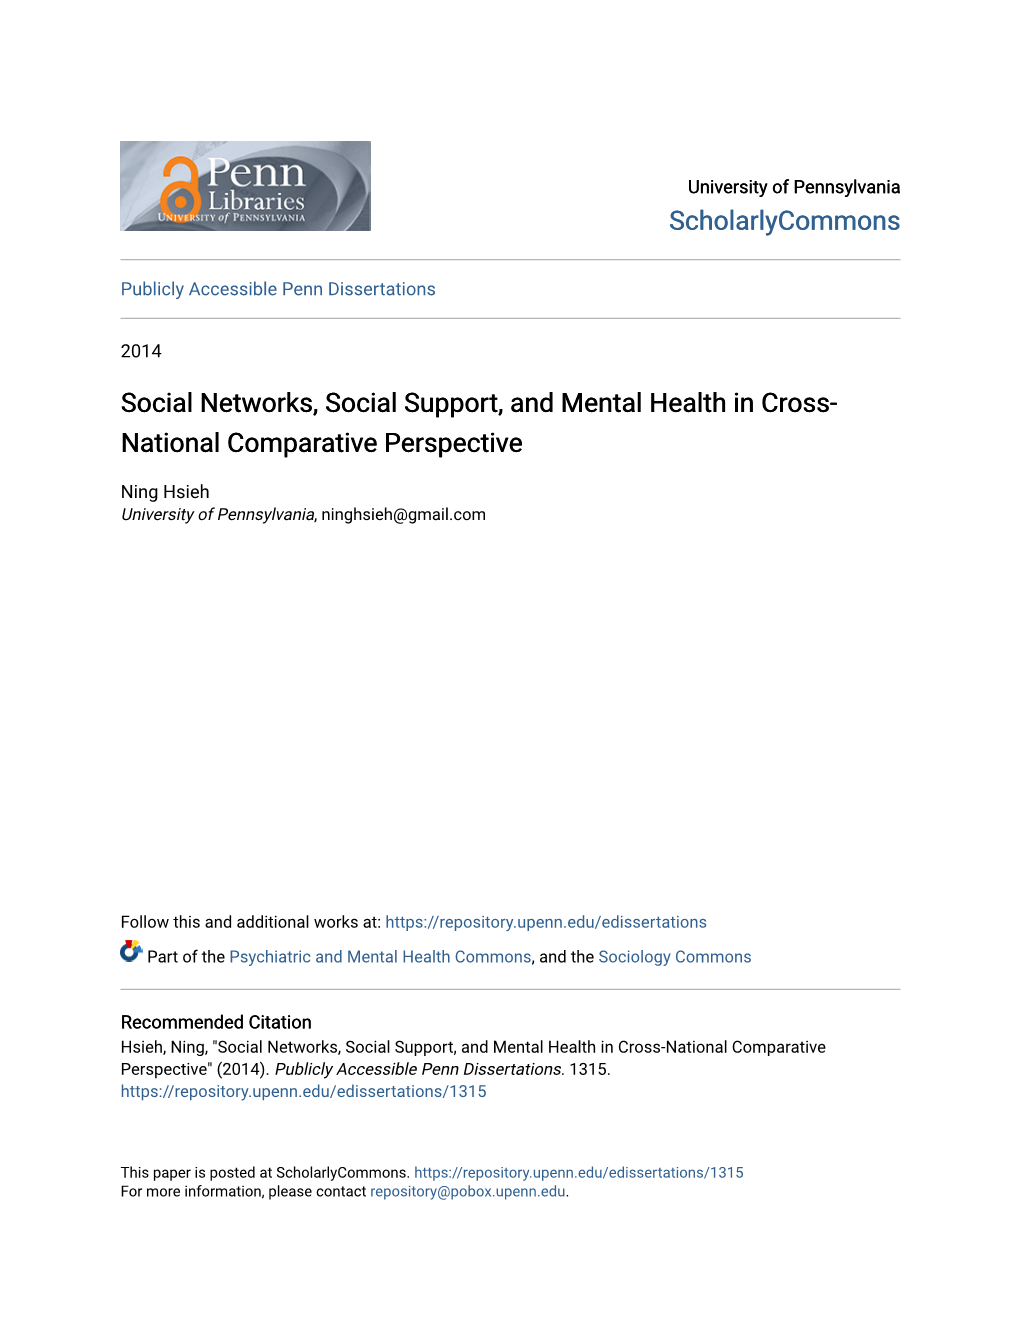 Social Networks, Social Support, and Mental Health in Cross-National Comparative Perspective" (2014)